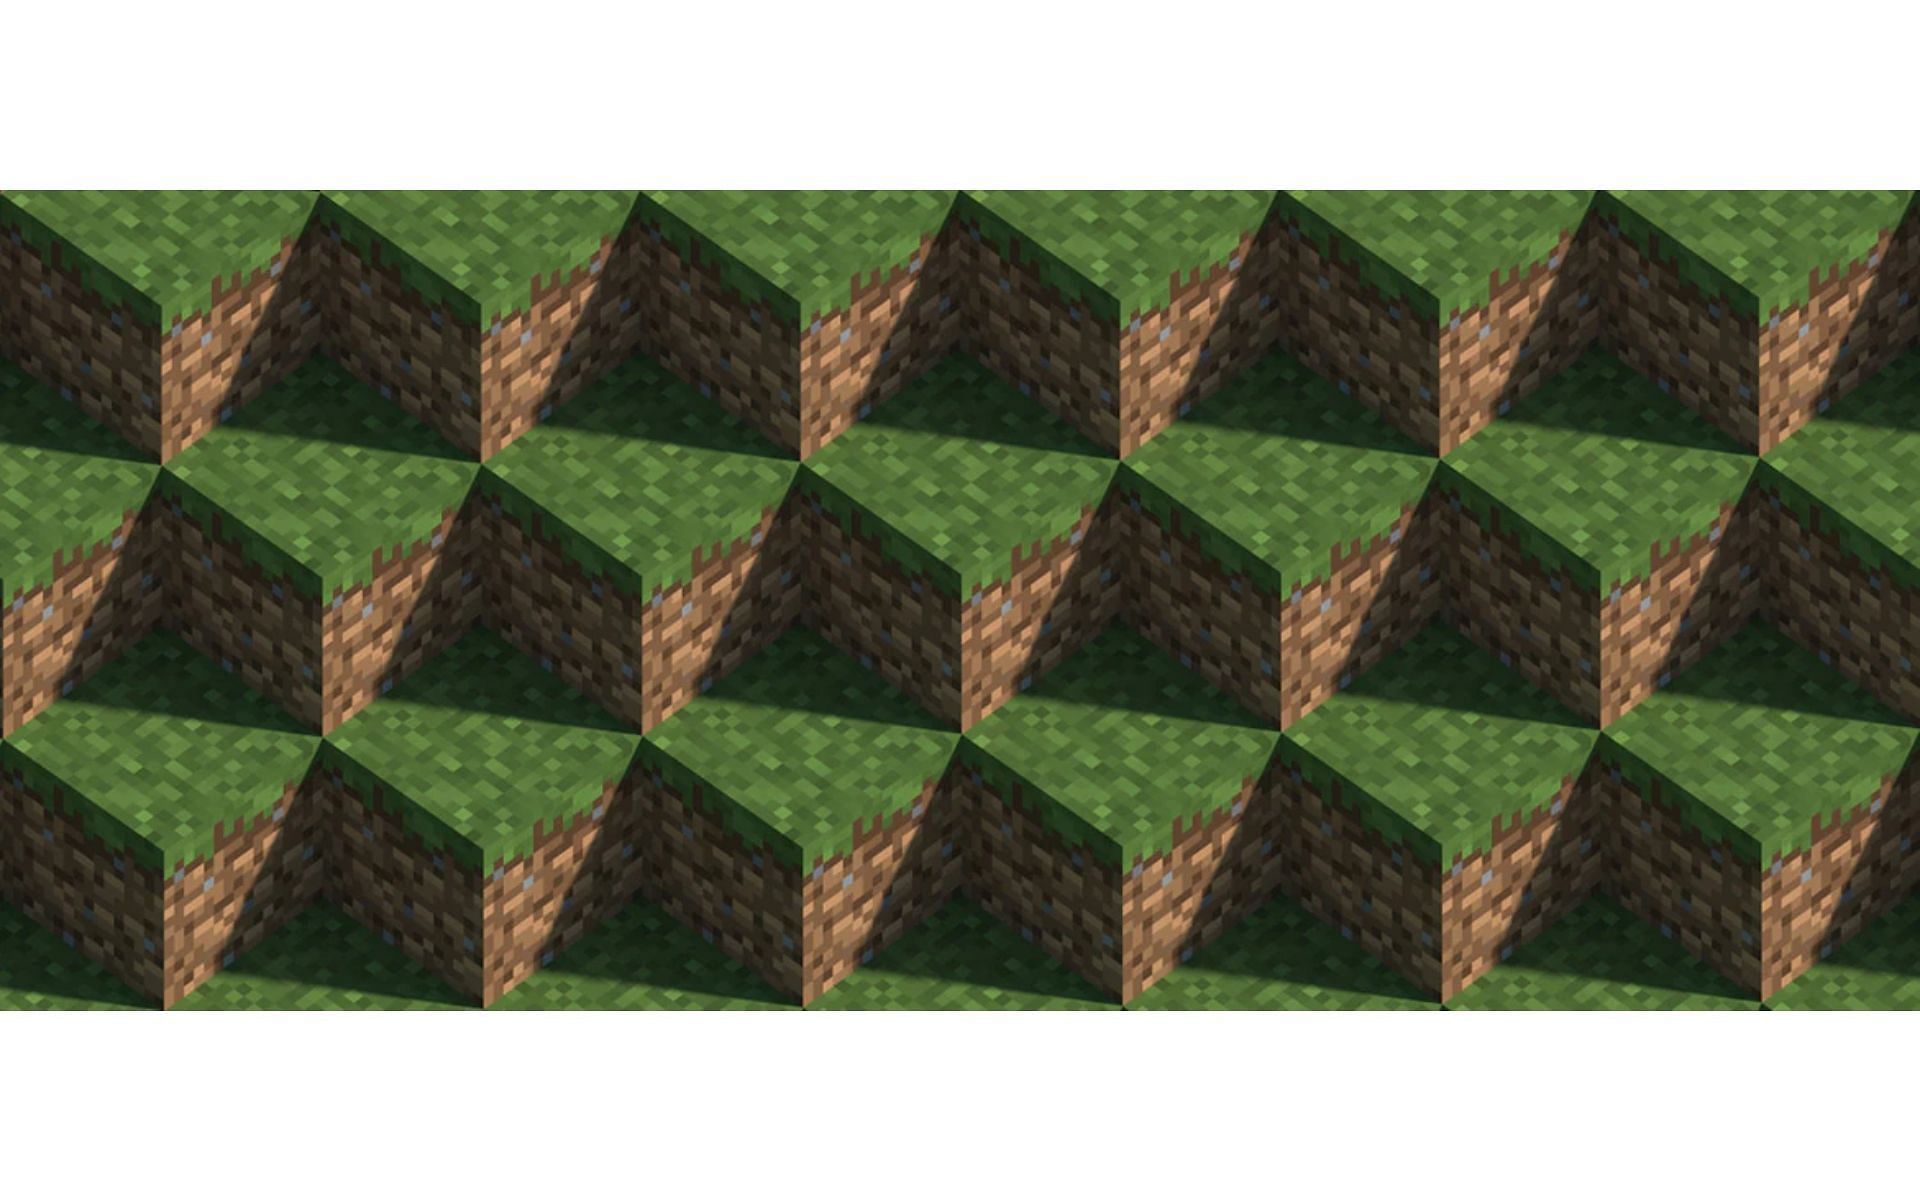 Using the same block can get old - use new ones to keep builds fresh (Image via Mojang)